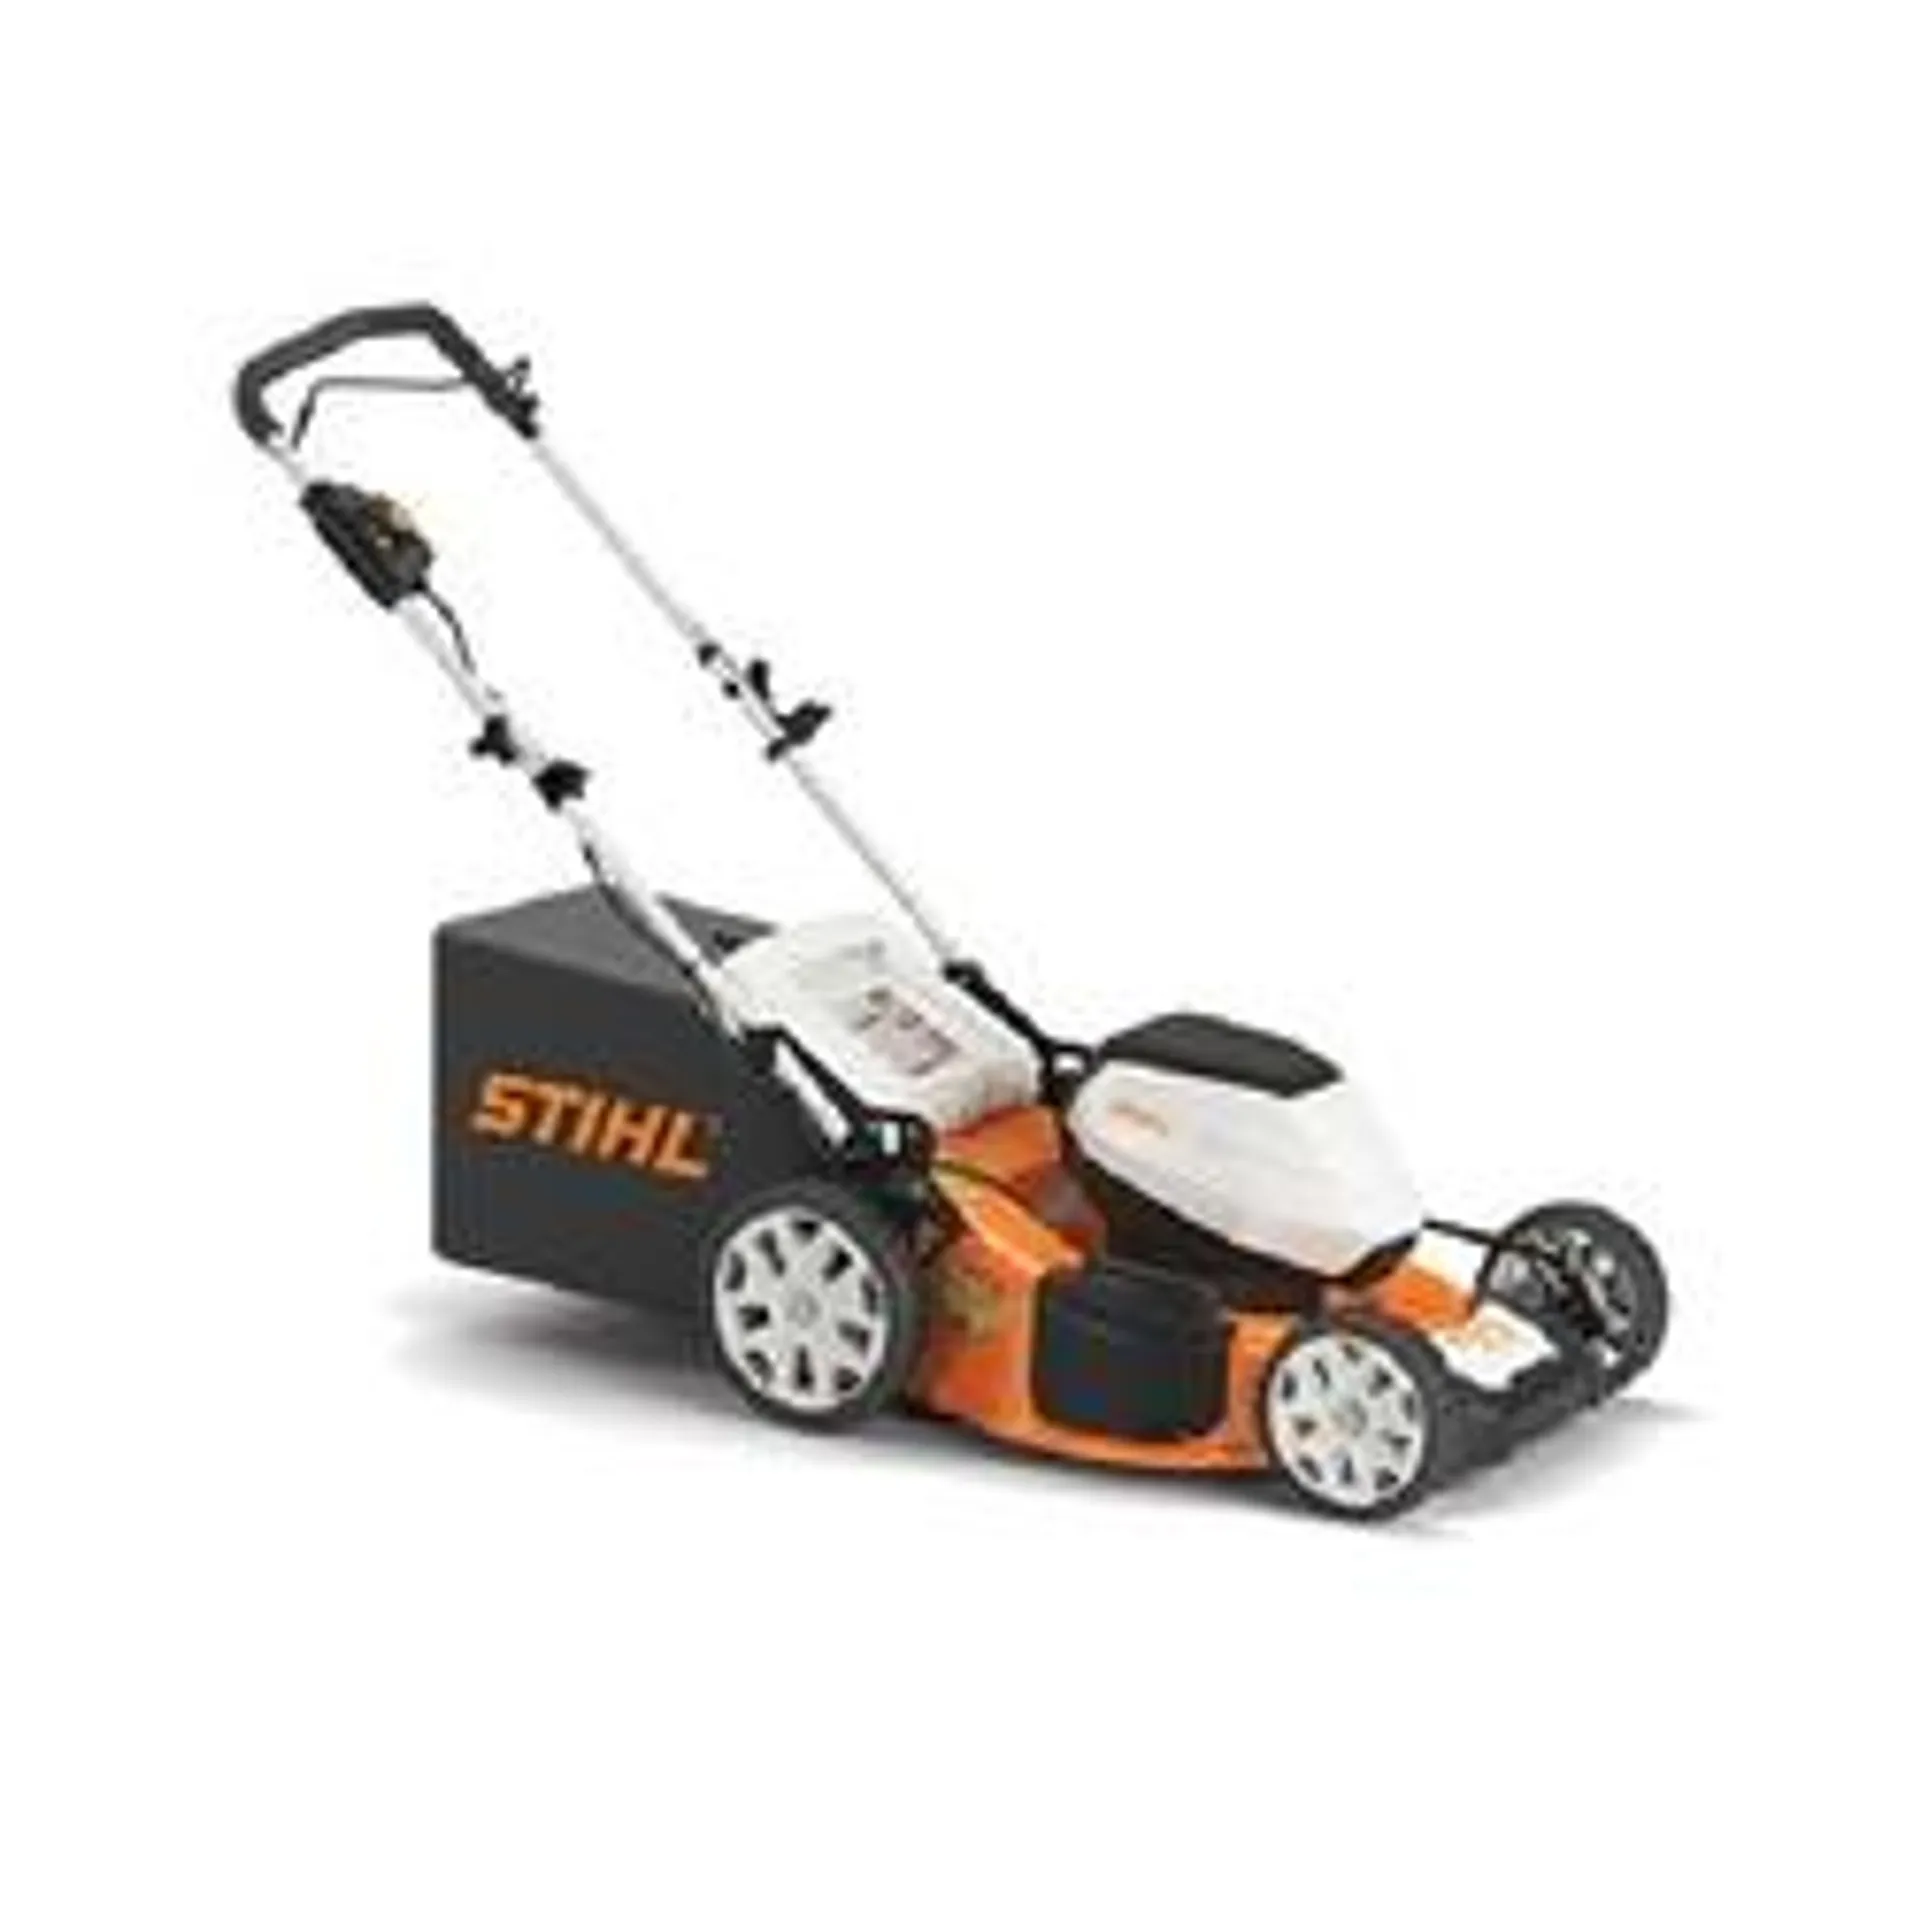 STIHL RMA 460 Cordless ,18 in, Lawn Mower, 36 V, Lithium-Ion, Direct Drive Blade, With Charger